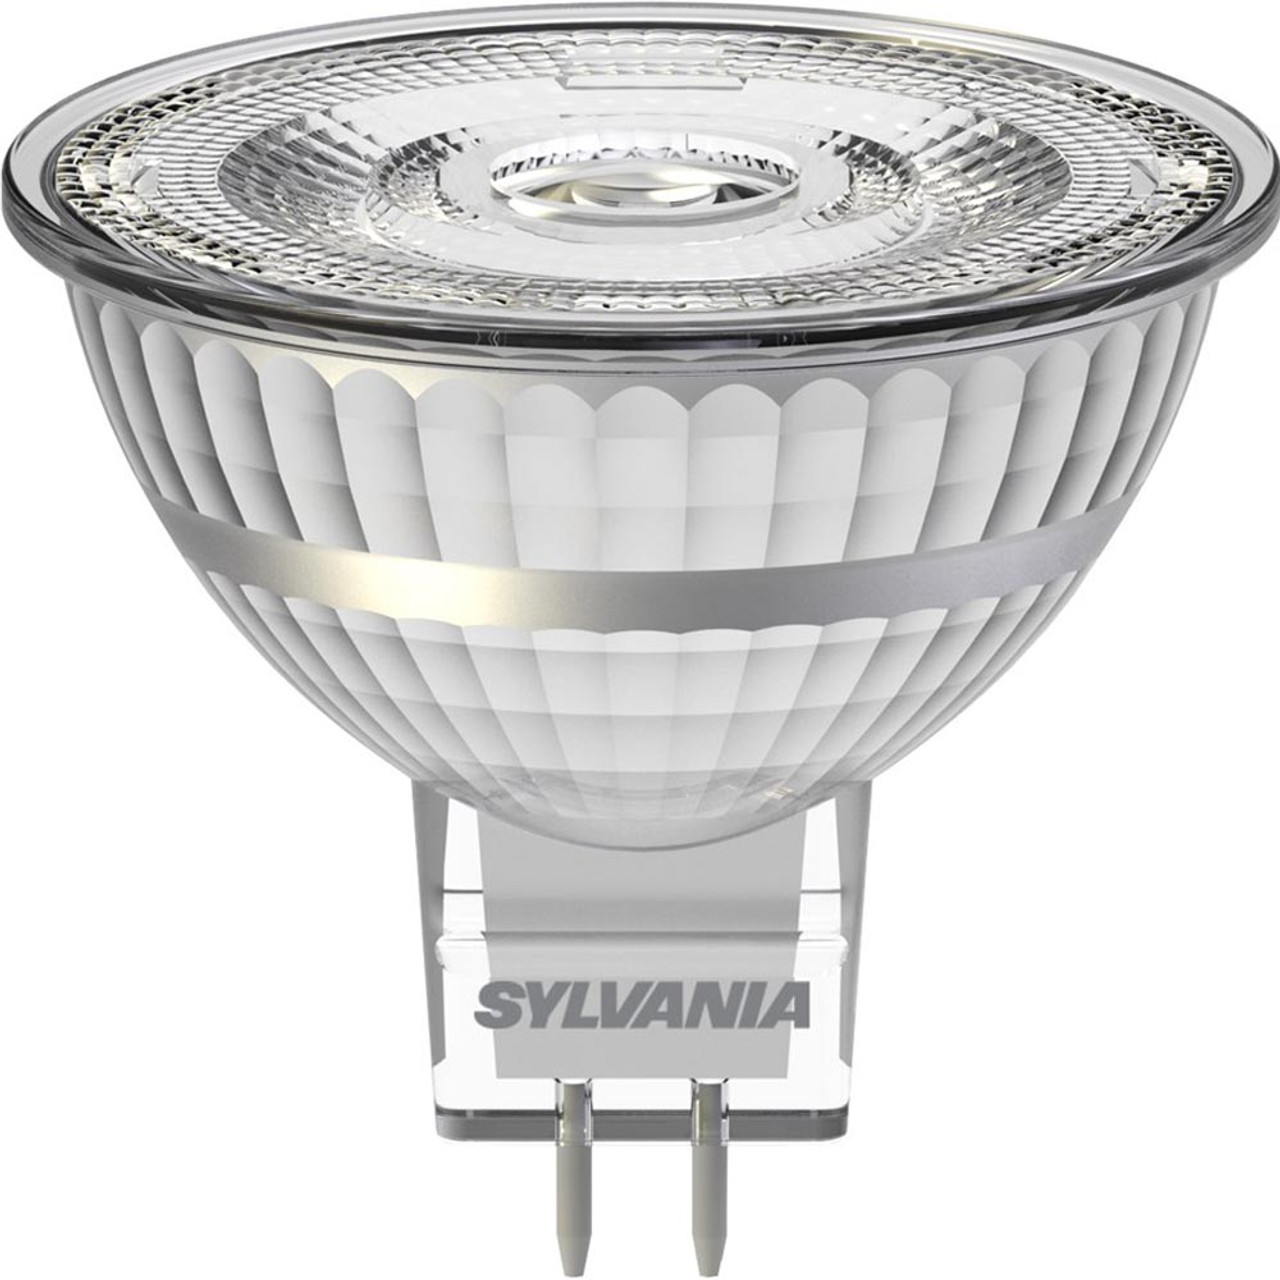 RefLED Superia LED MR16 7.5W (50W) Daylighte 865 36 Degrees Dimmable